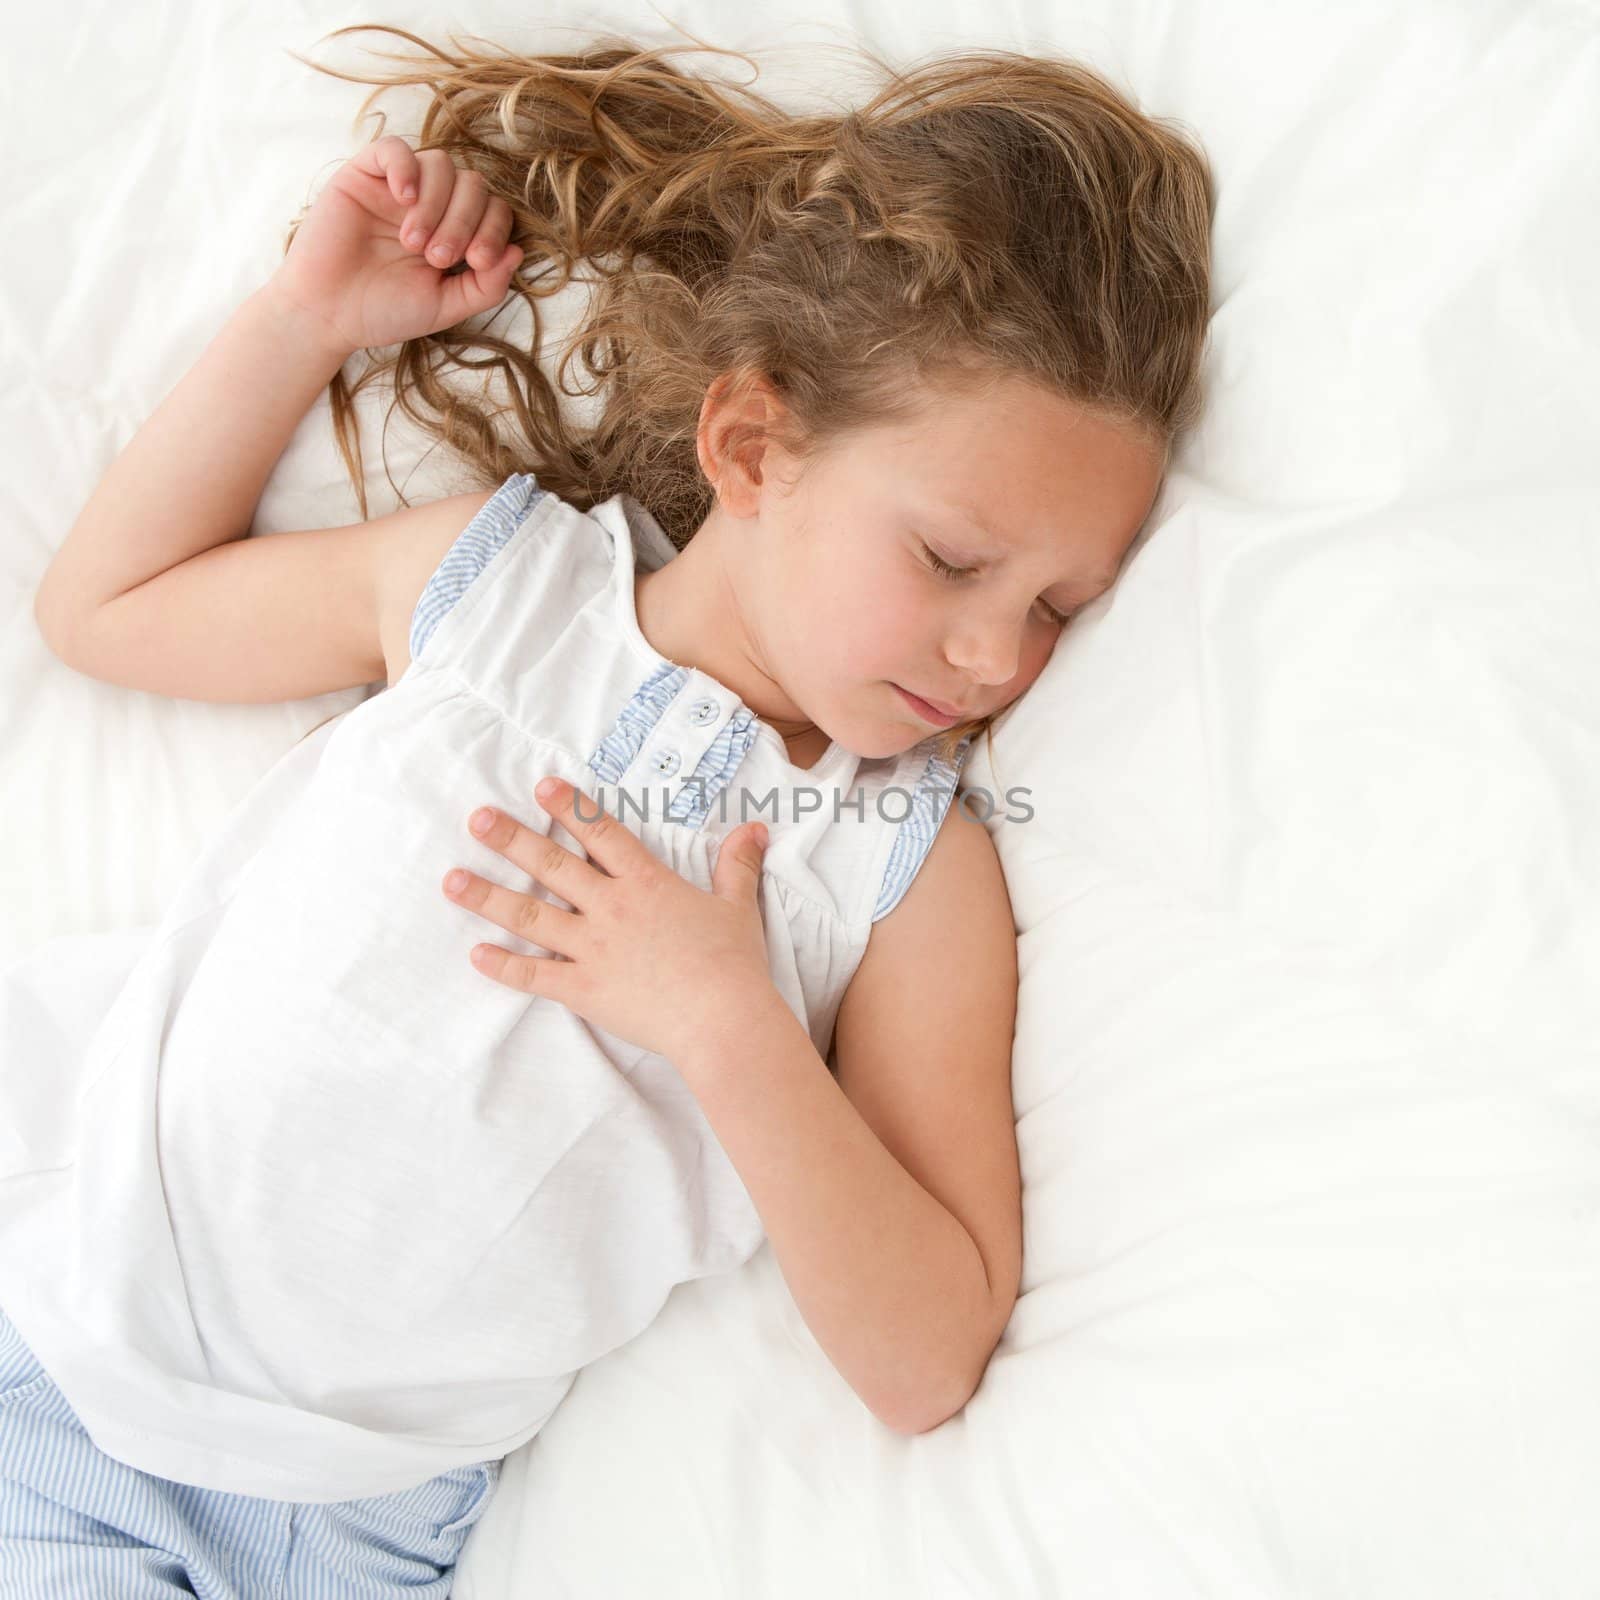 Young little girl sleeping with peaceful face expression.